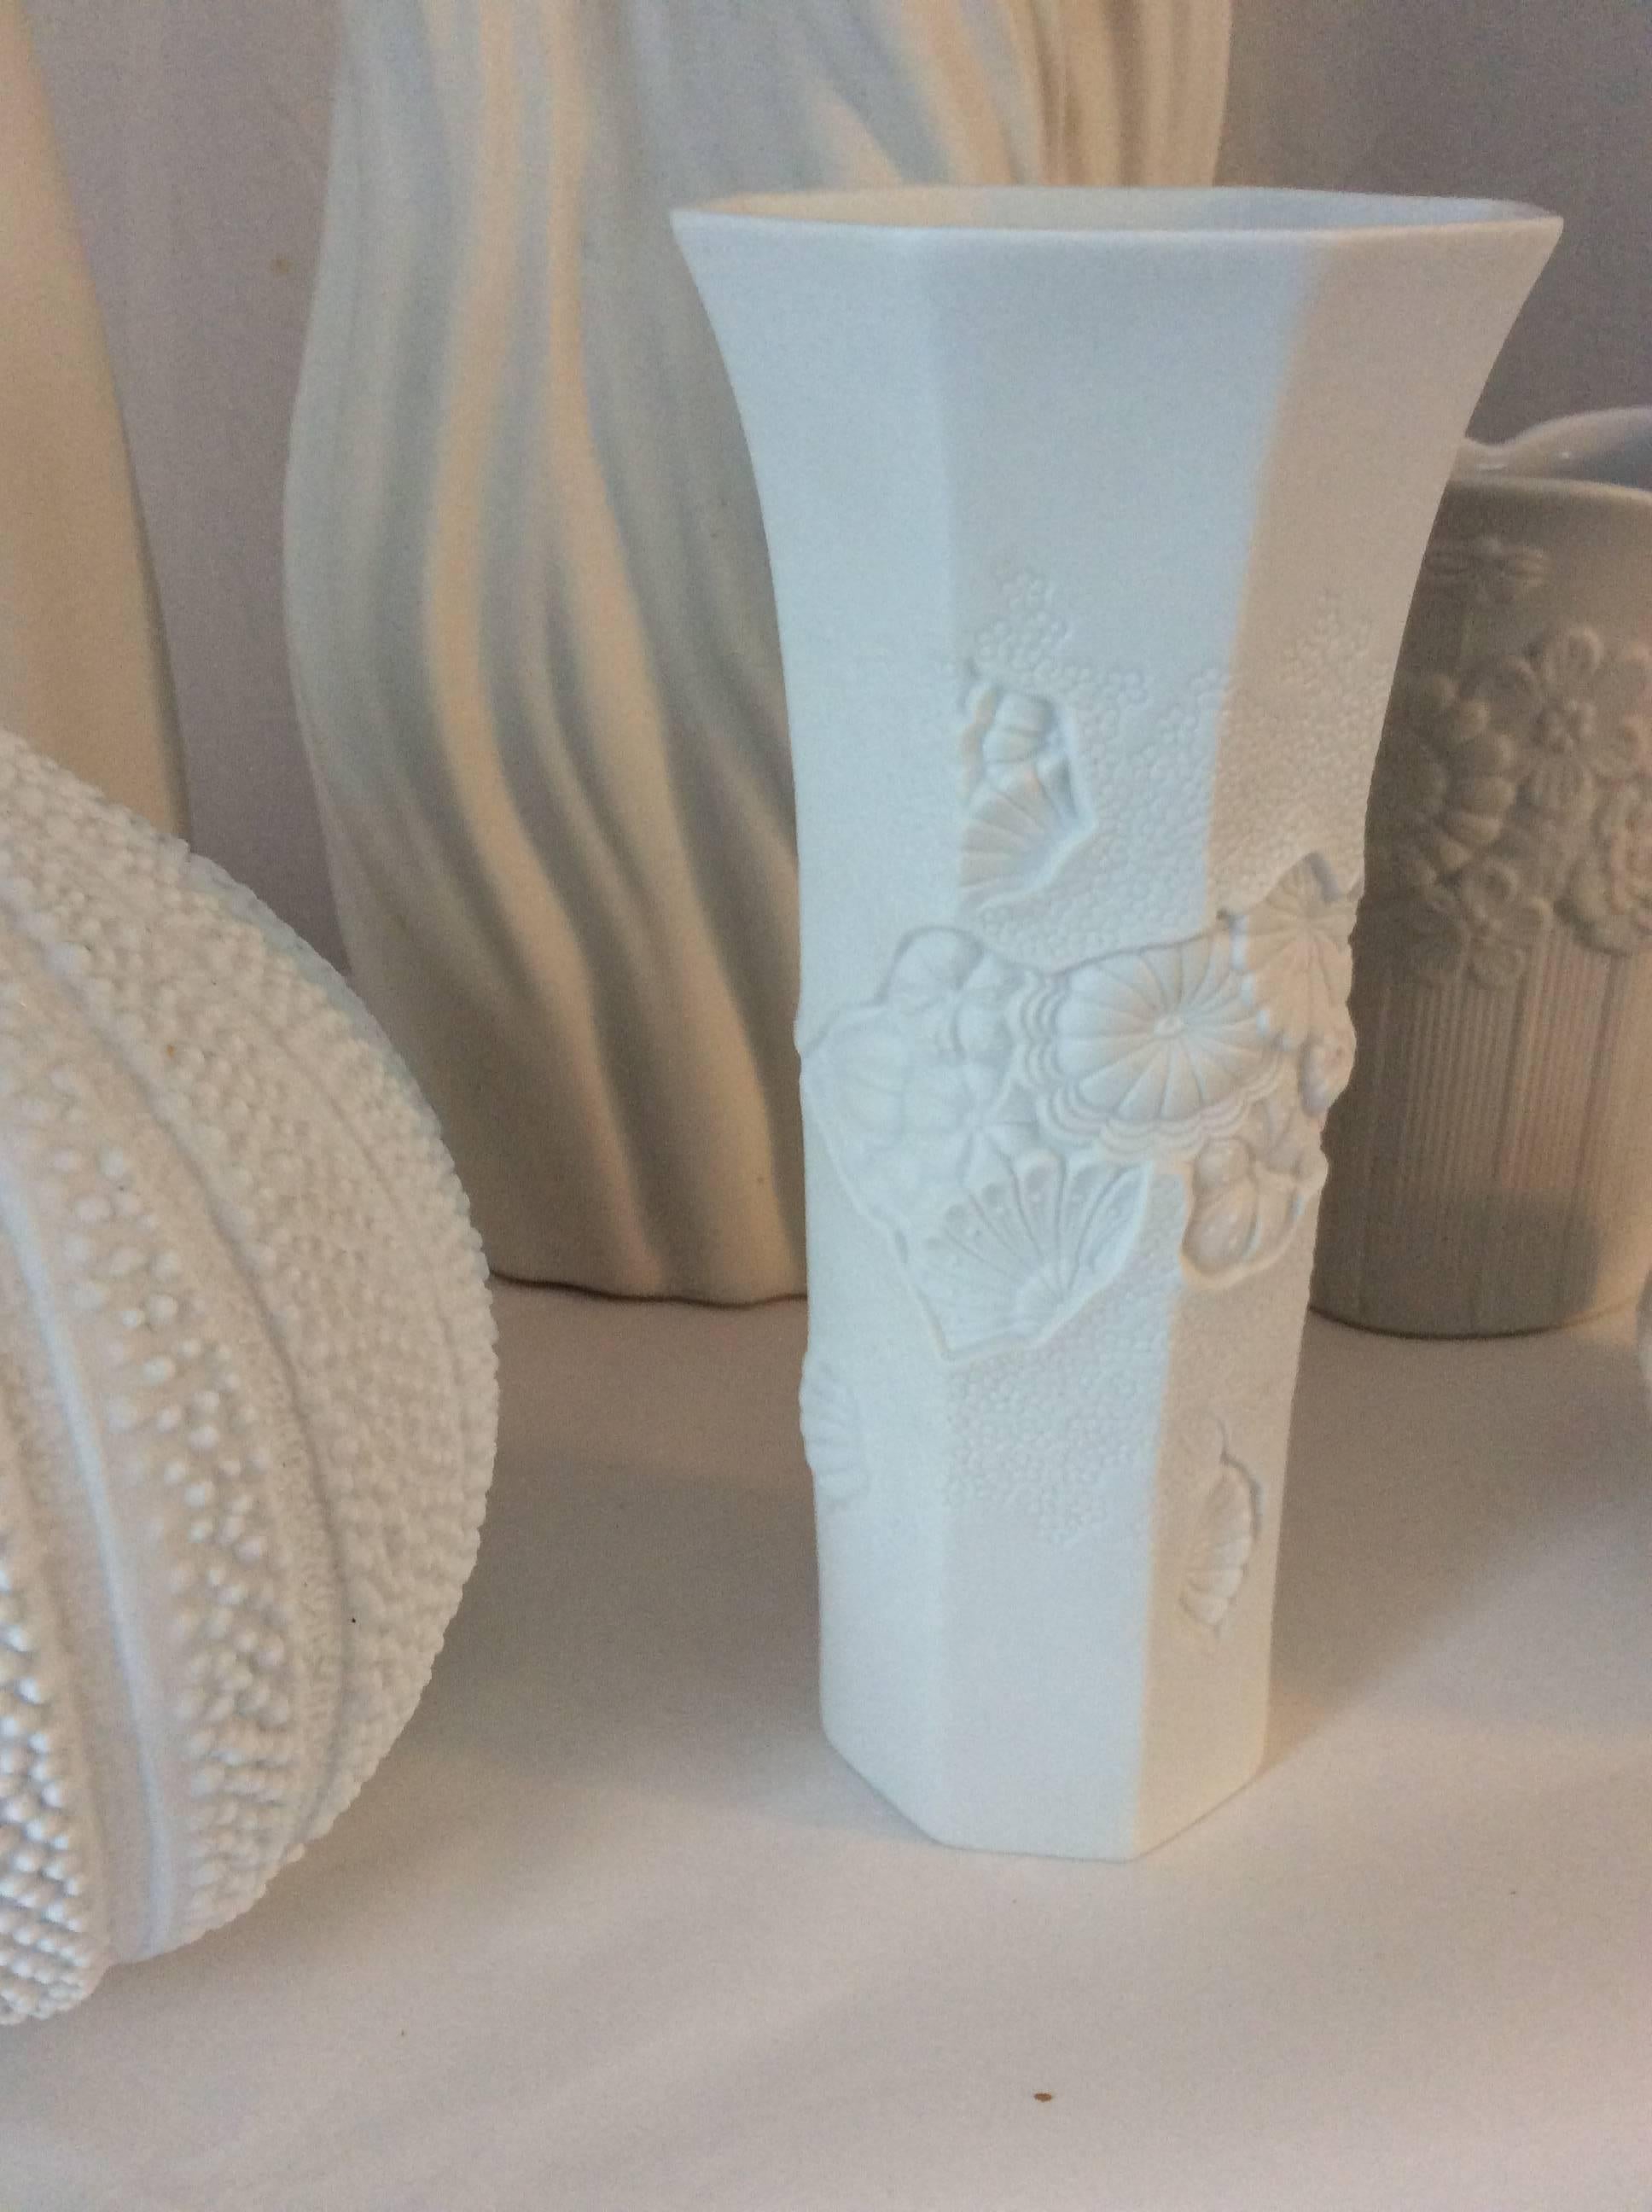 You are looking at a collection of six white bisque porcelain vases and one bowl with lid. They are all different size and shapes which makes for a nice vignette. Only one of the pieces is signed - Kaiser, octagonal shape in foreground and the